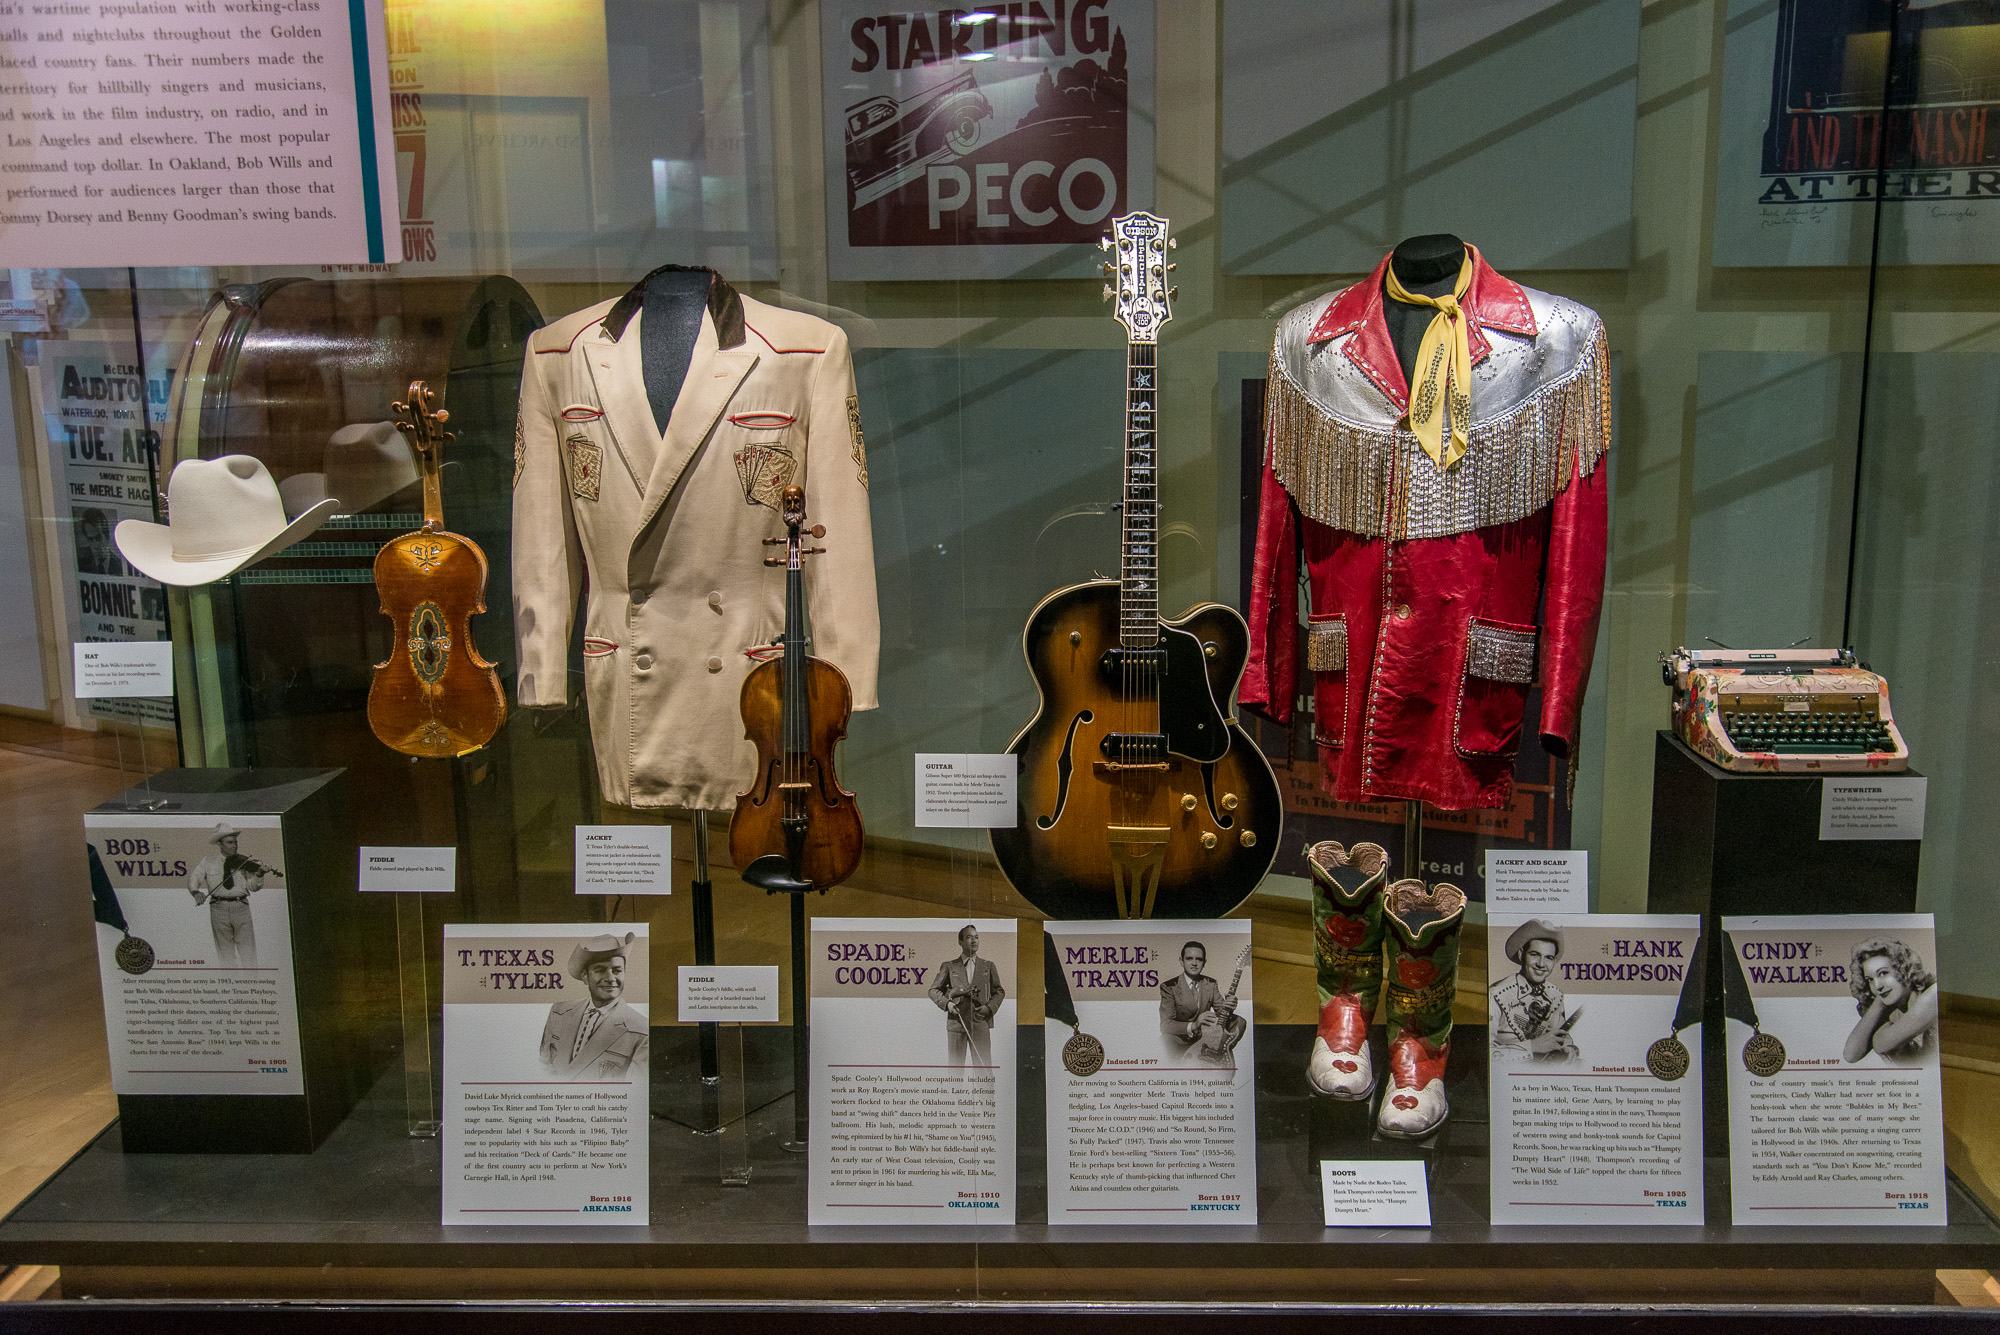 Country Music Hall of Fame. 5th avenue.